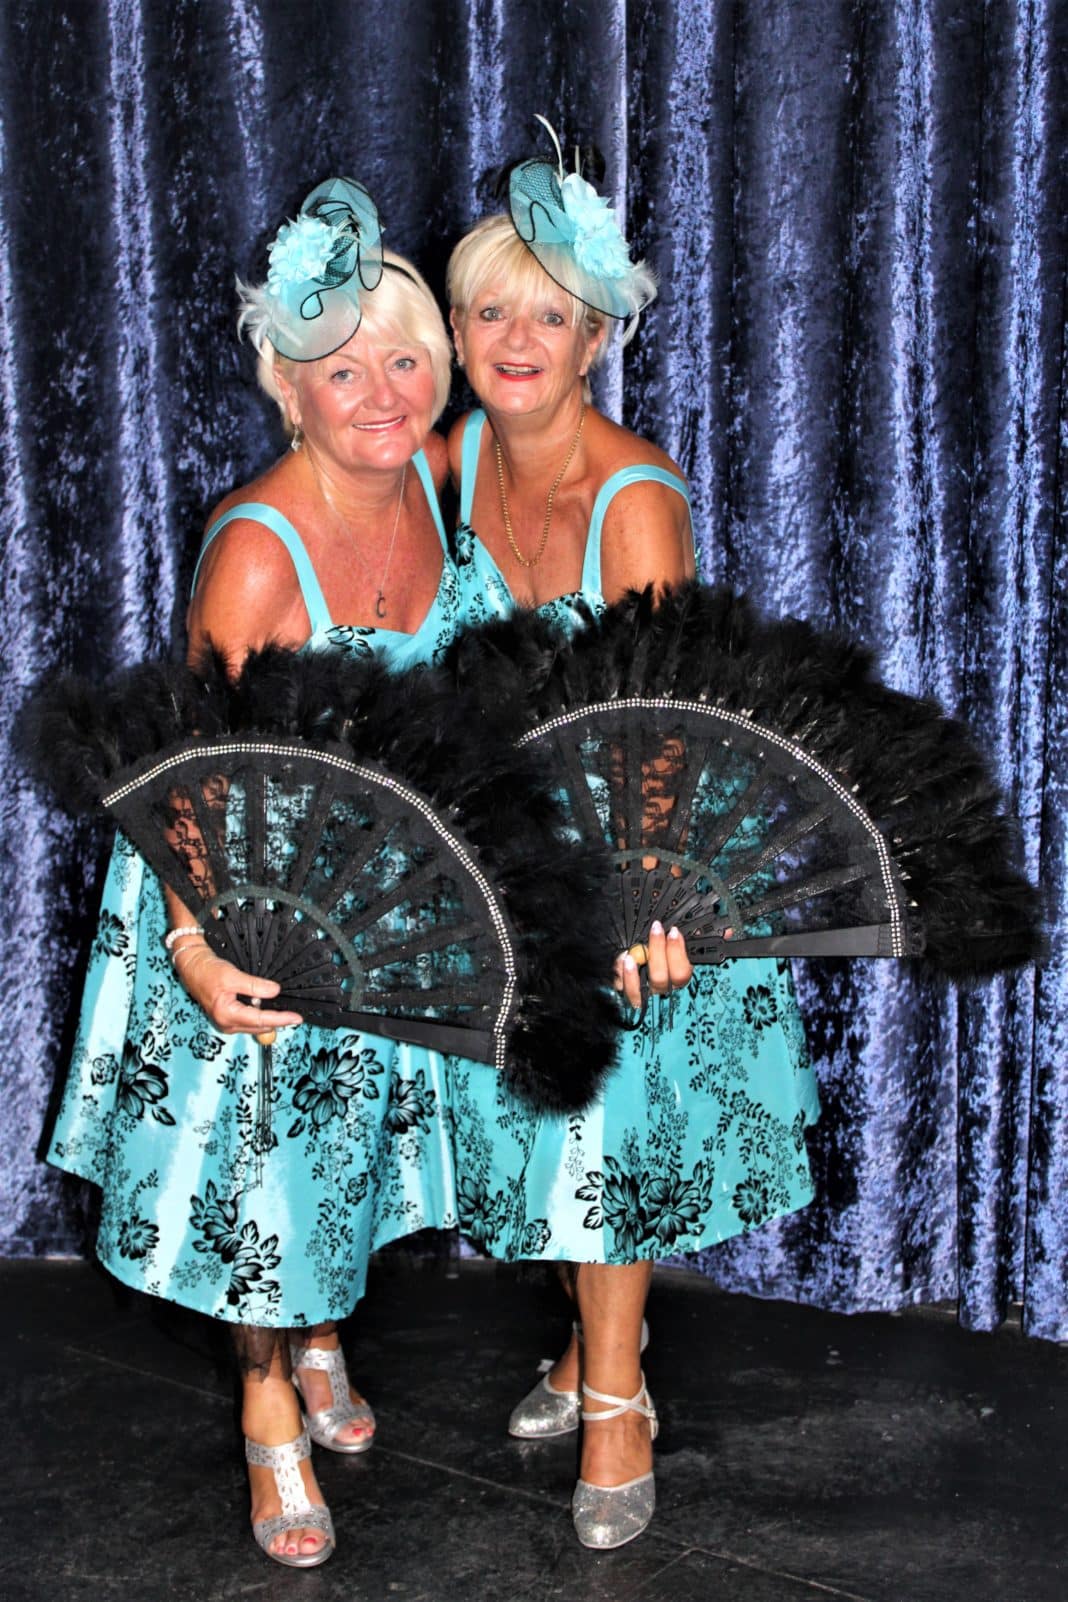 Pictured are Carol Spence and Julie Cartwright who will be performing the number ‘Sisters’ from the musical White Xmas